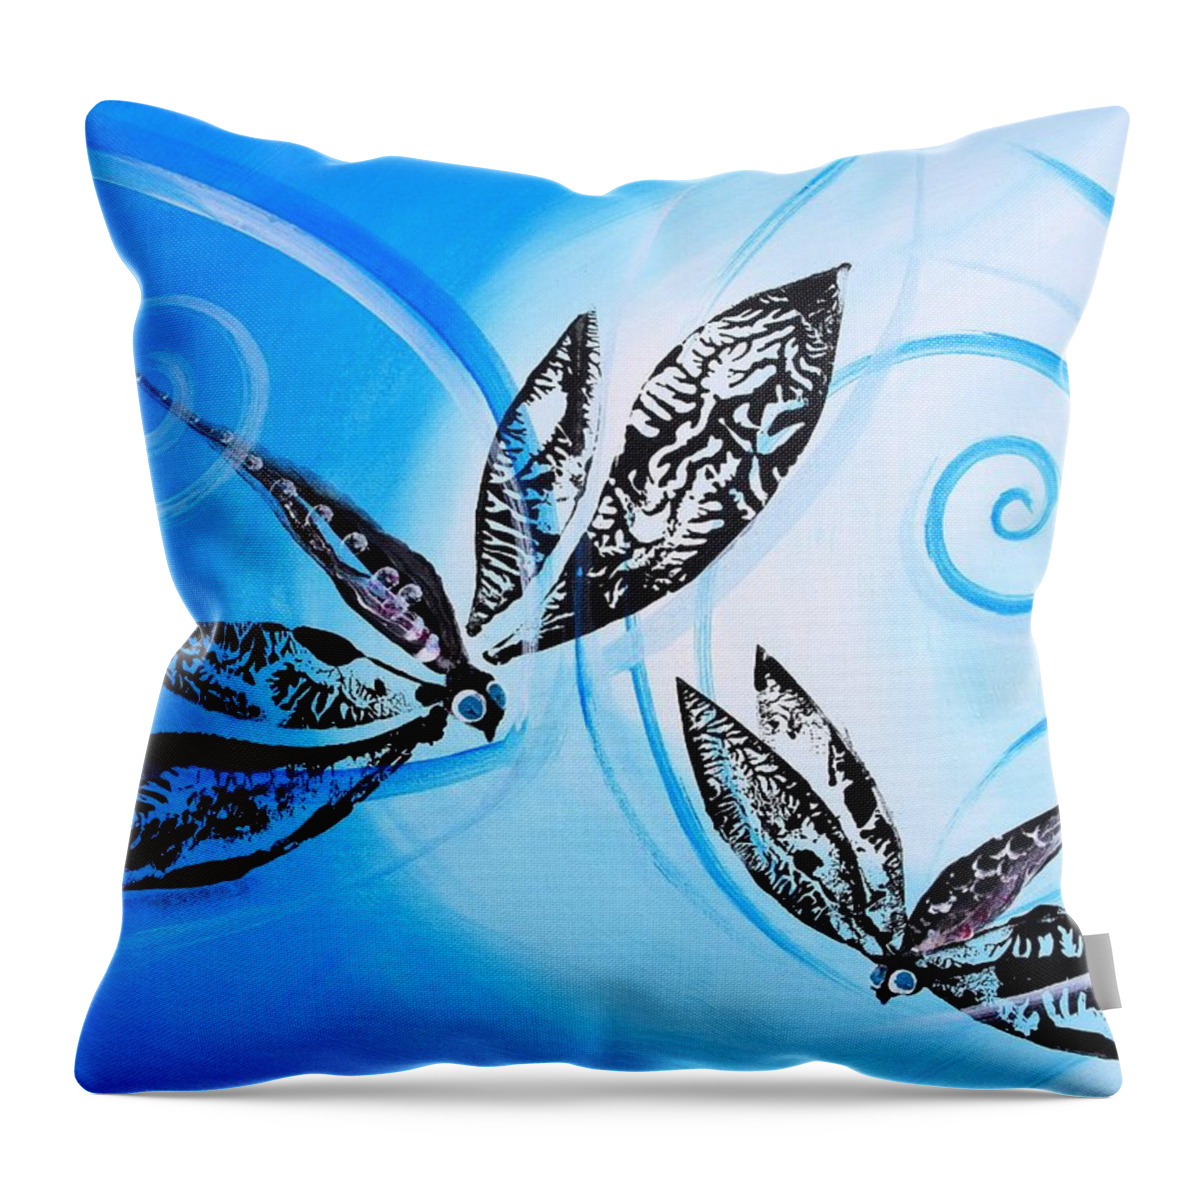 Dragonly Throw Pillow featuring the painting Duex Libellules Abstrait by J Vincent Scarpace